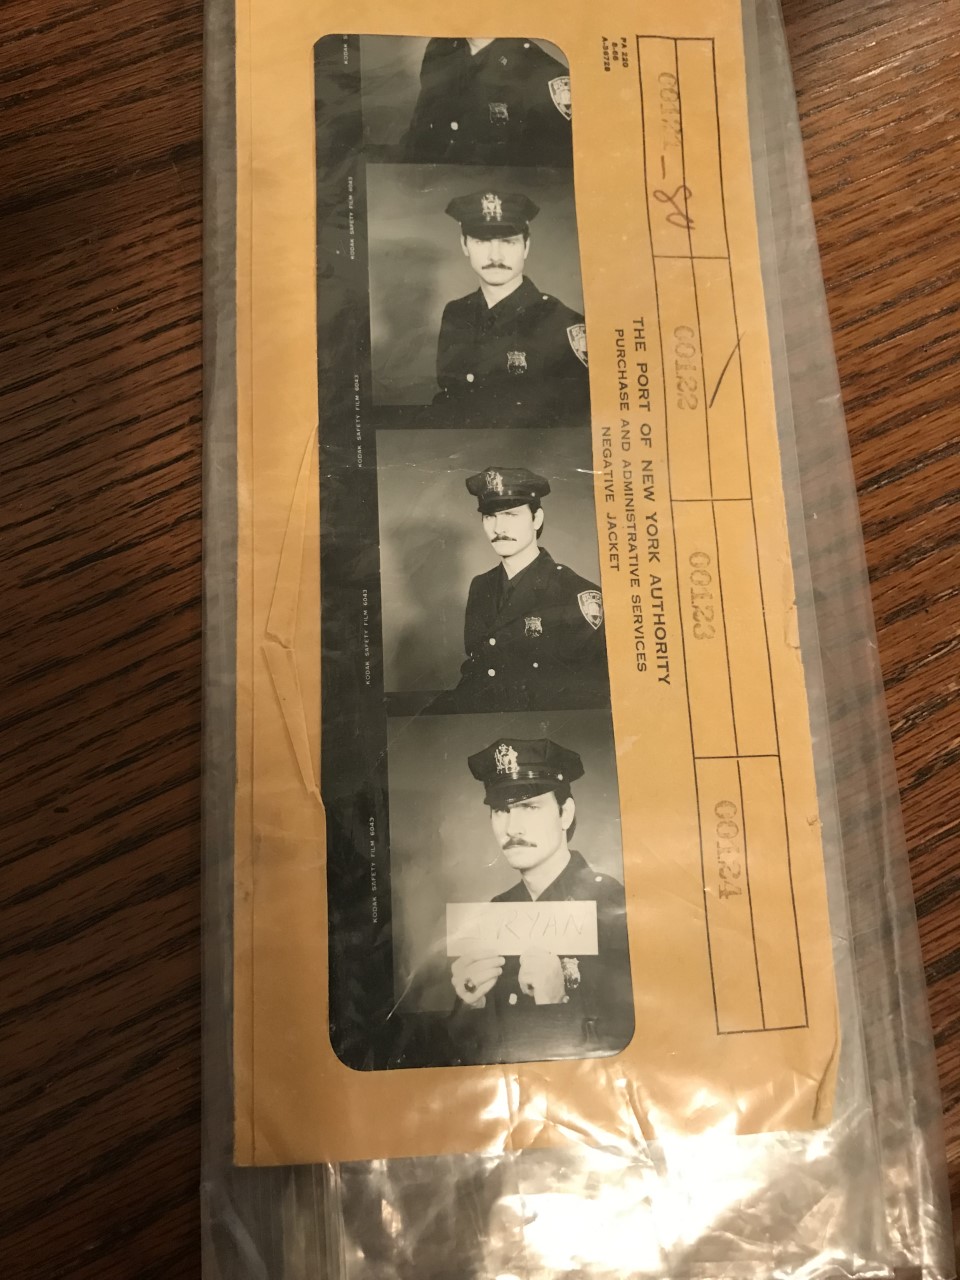 A strip of photographs showing a mustached man in a police uniform and hat